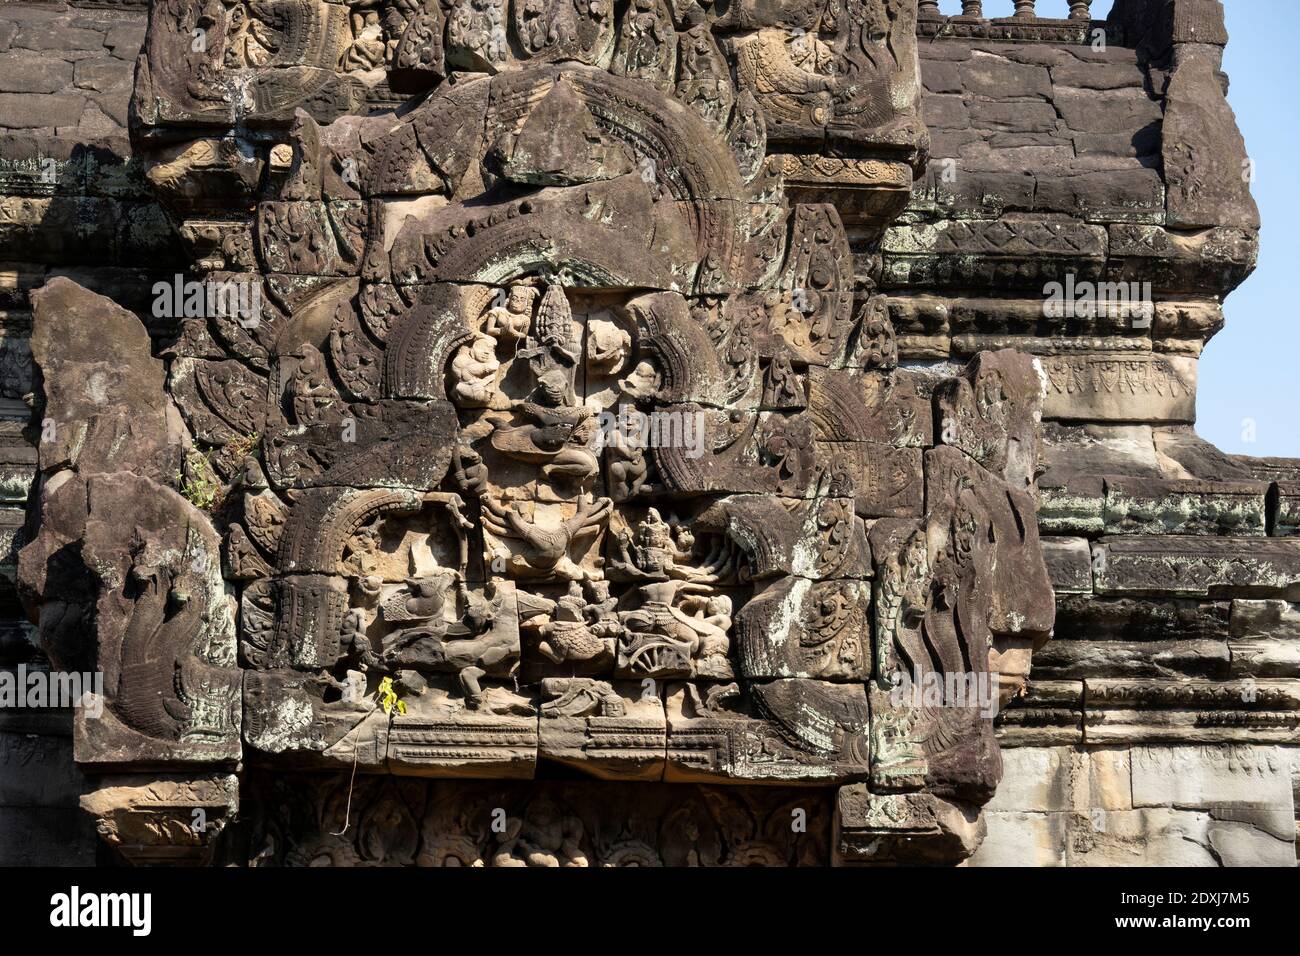 Bas-relief on the walls of Angkor Stock Photo